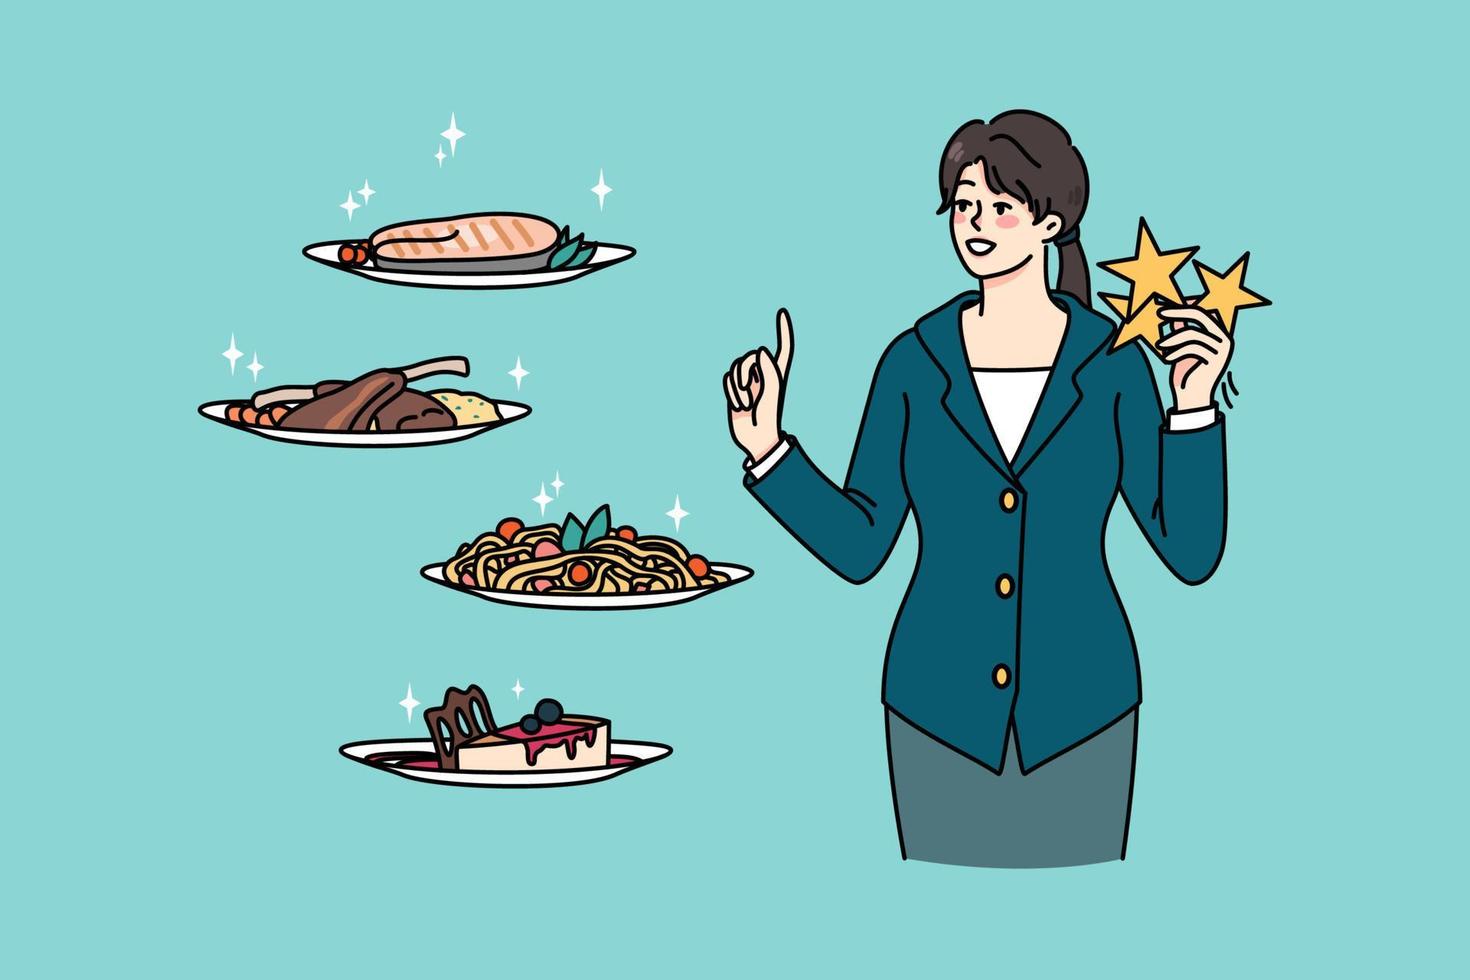 Smiling woman client with stars in hand rate dishes in restaurant. Happy female customer assess food or high quality service for outdoor eating. Feedback and opinion. Vector illustration.